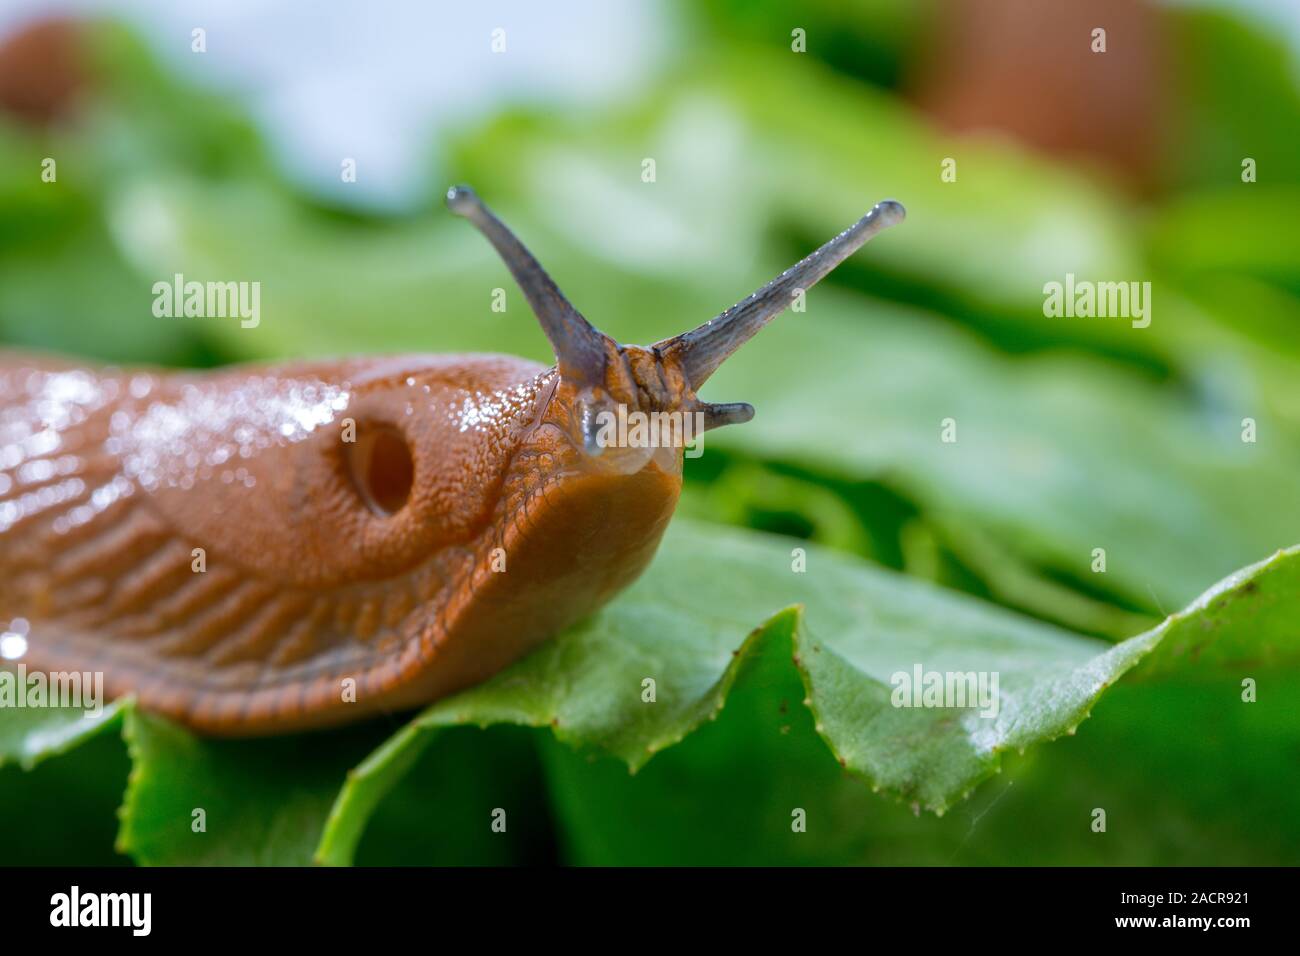 Snail with salad leaf Stock Photo